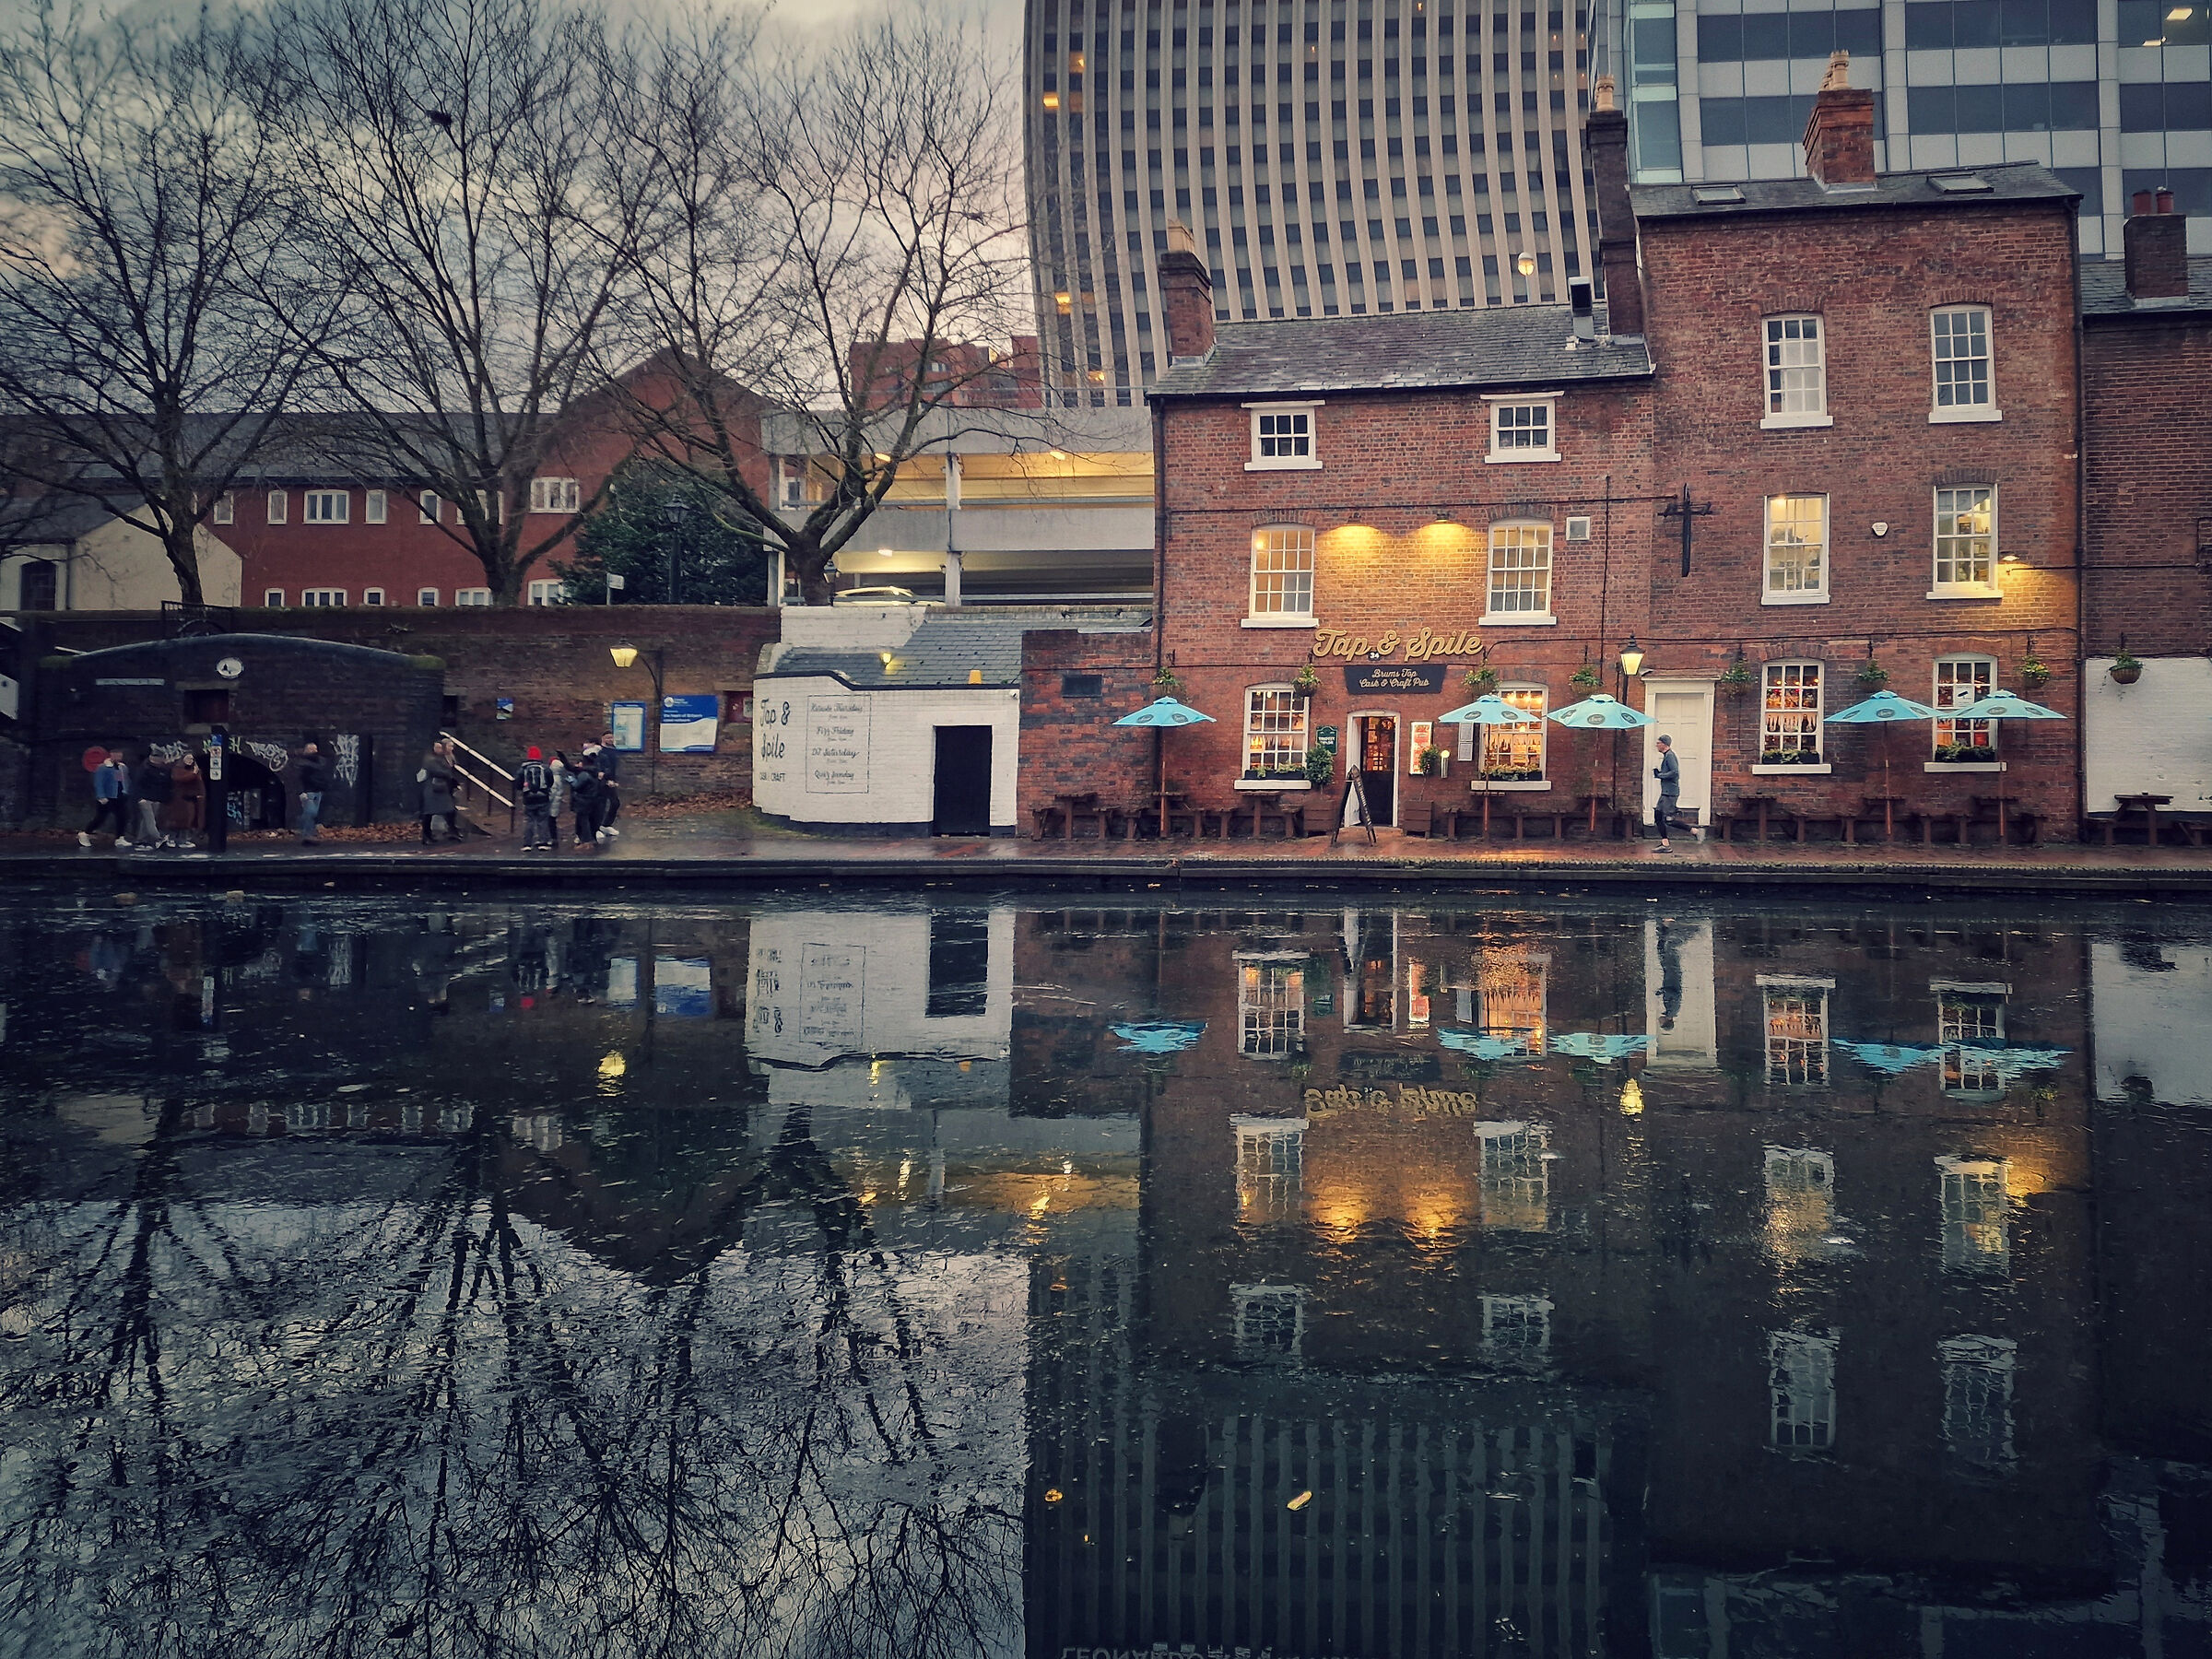 Birmingham, reflections in the center...